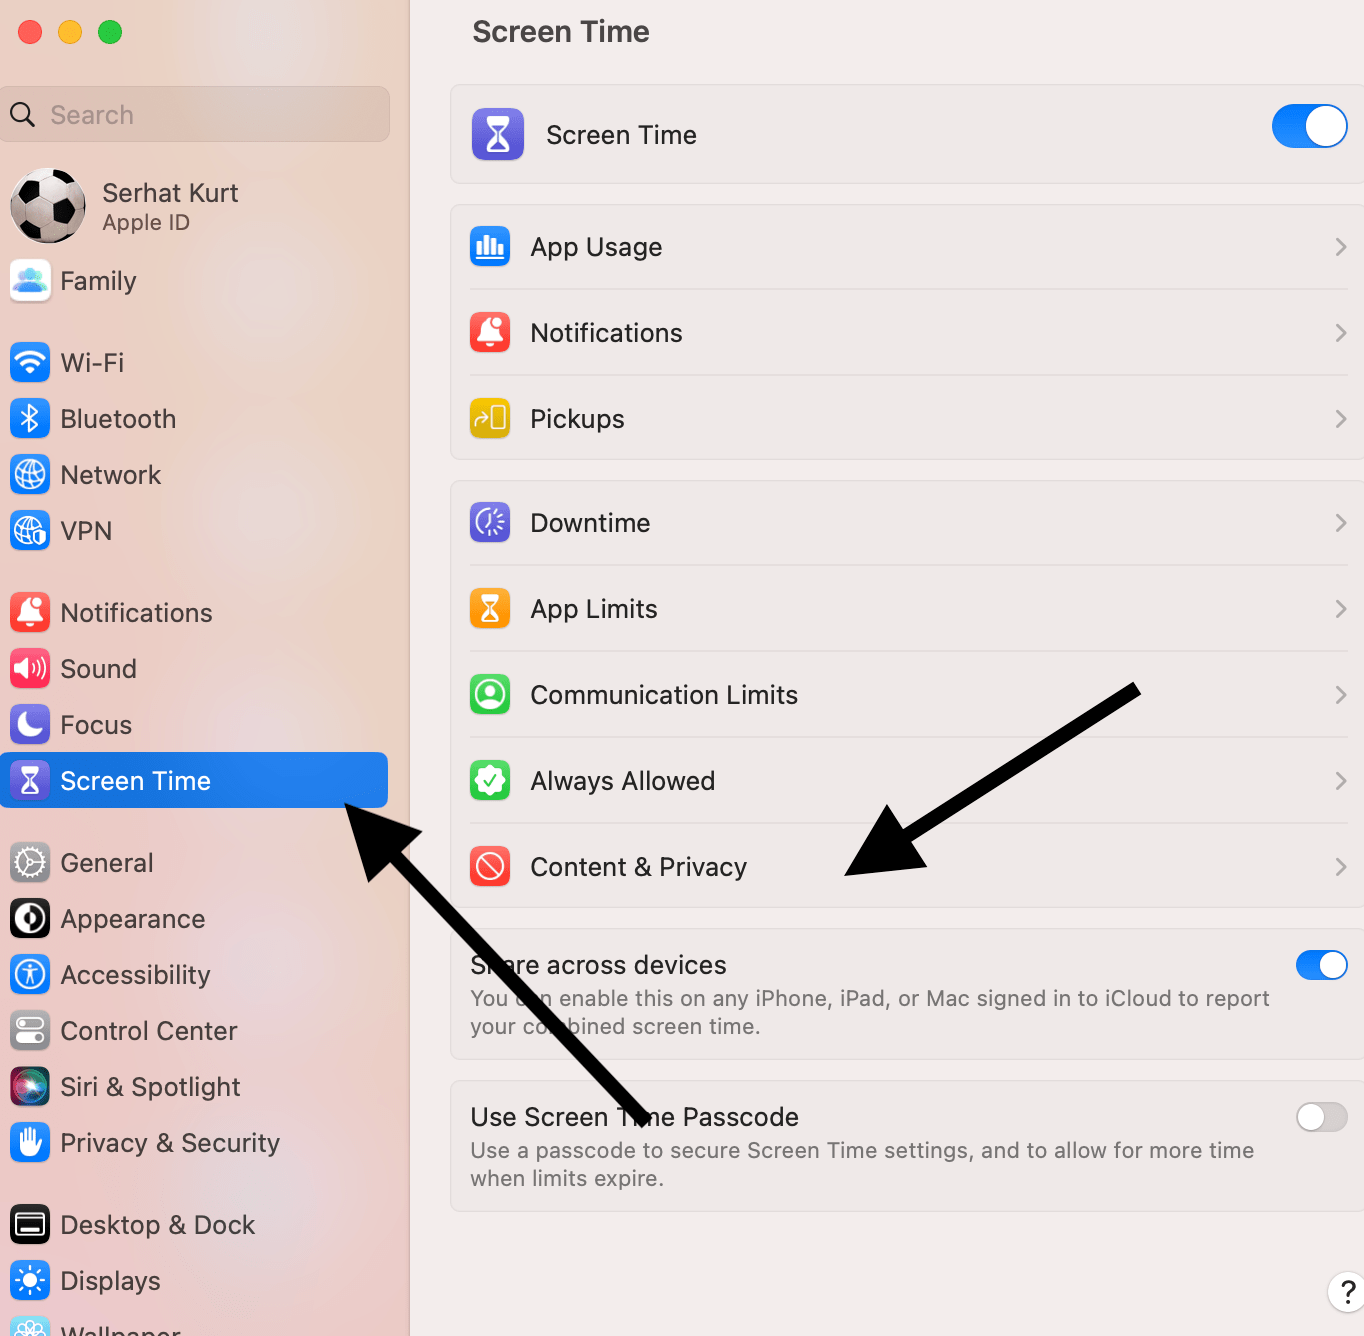 An image showing Screen Time settings on Mac